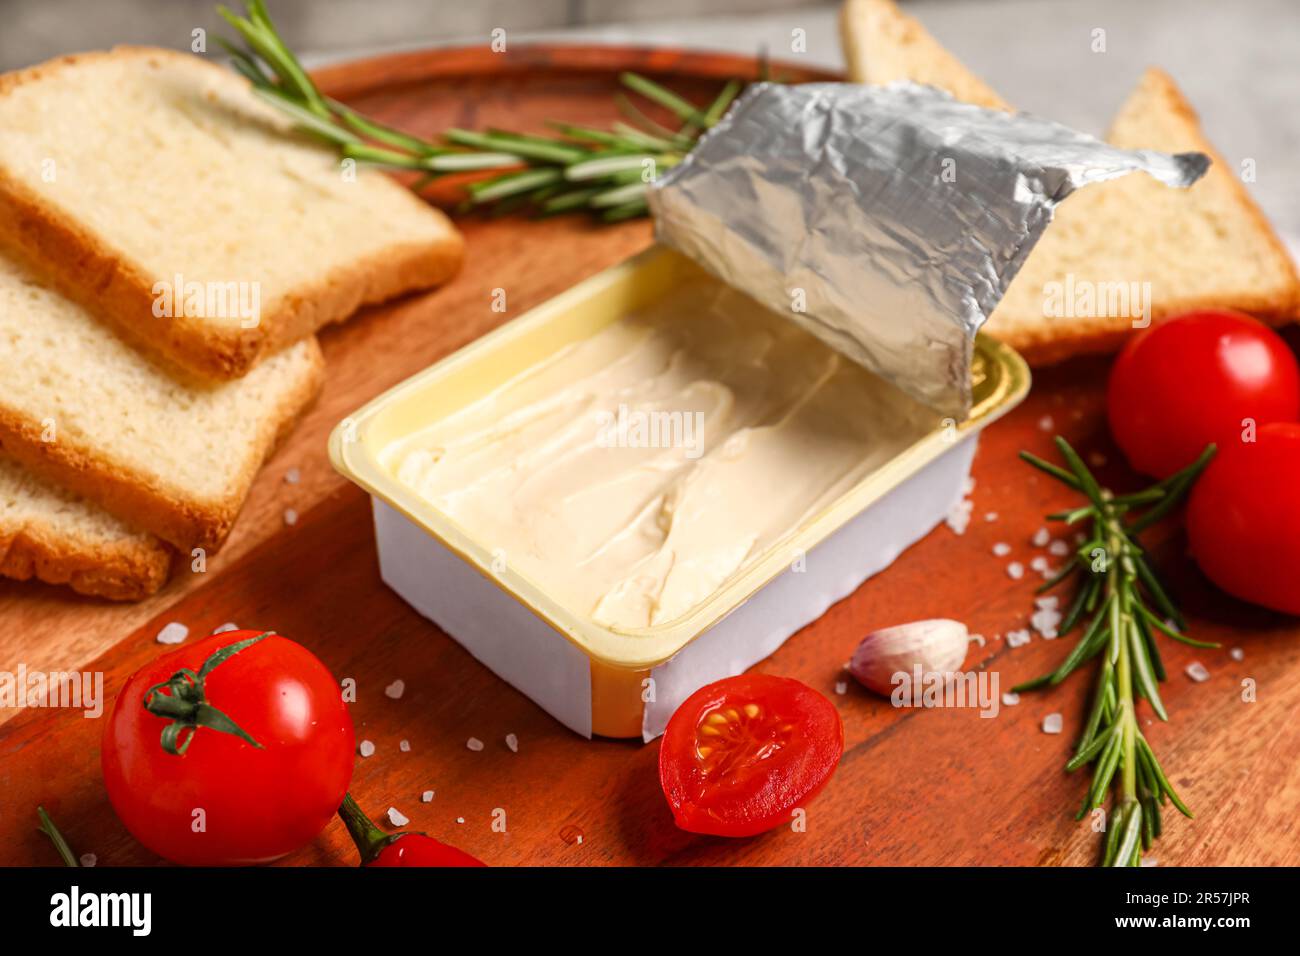 https://c8.alamy.com/comp/2R57JPR/plastic-container-with-tasty-cream-cheese-on-table-2R57JPR.jpg